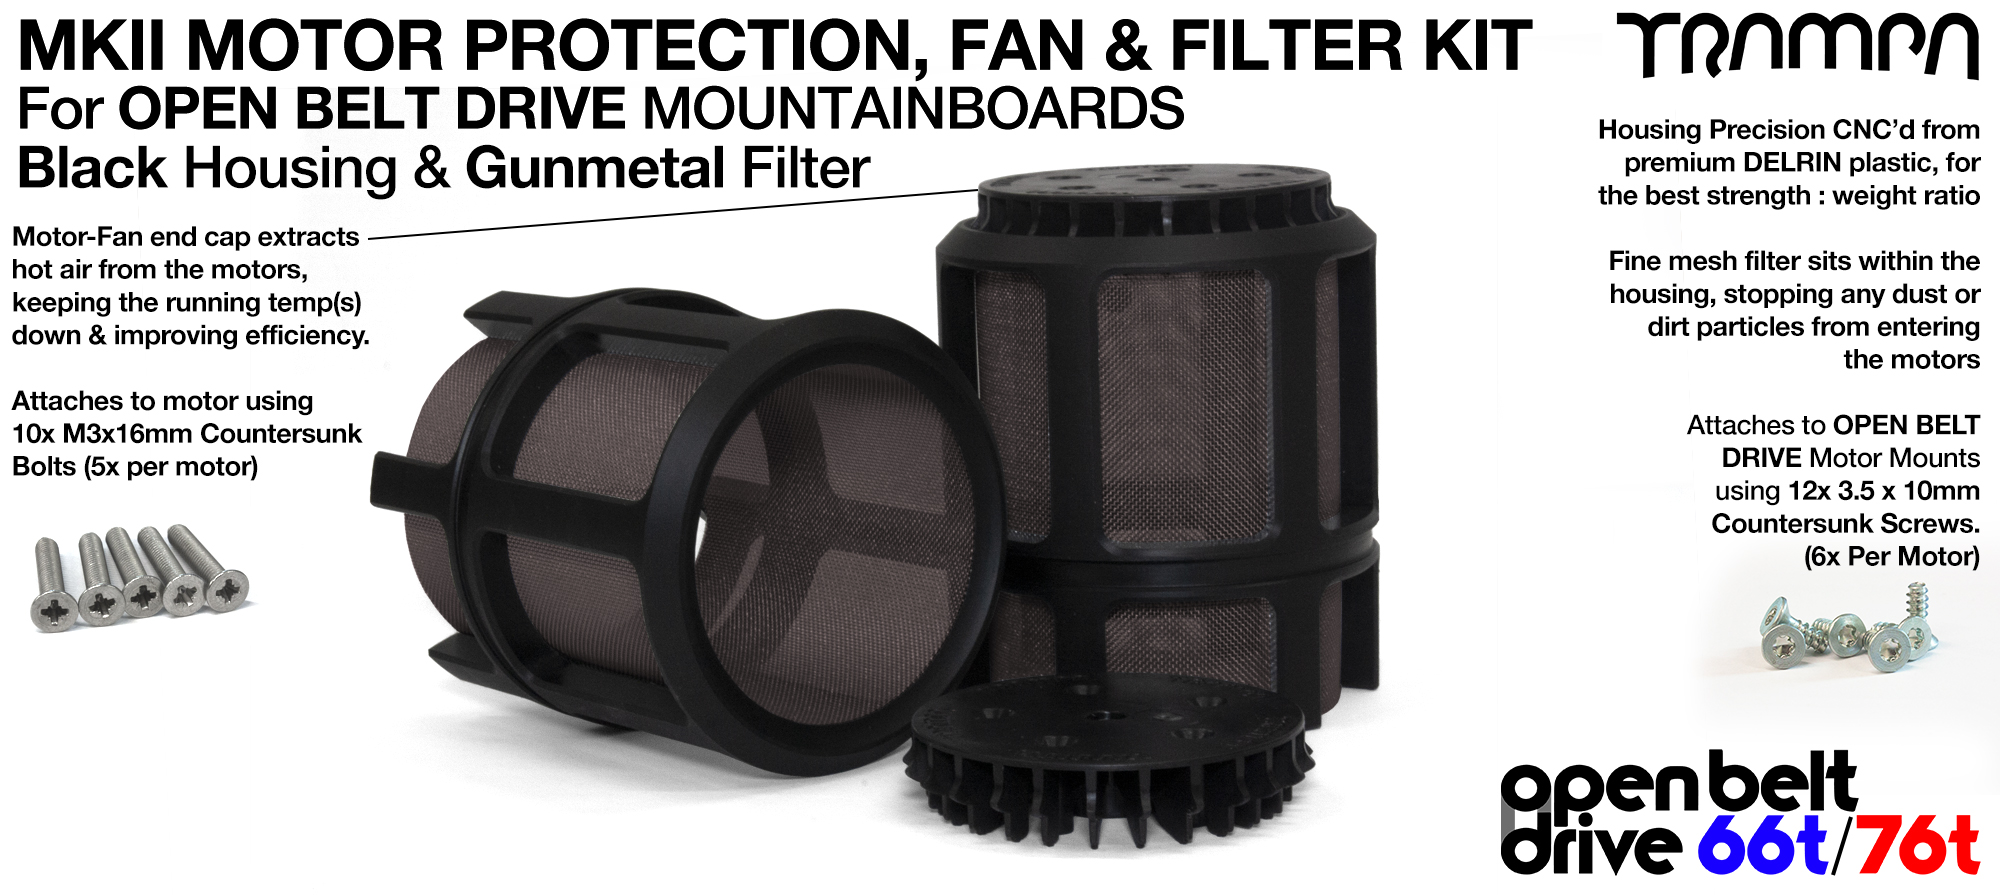 FULL CAGE Motor protection SUPER STRONG DELRIN Plastic includes Fan & GUNMETAL Filter - TWIN